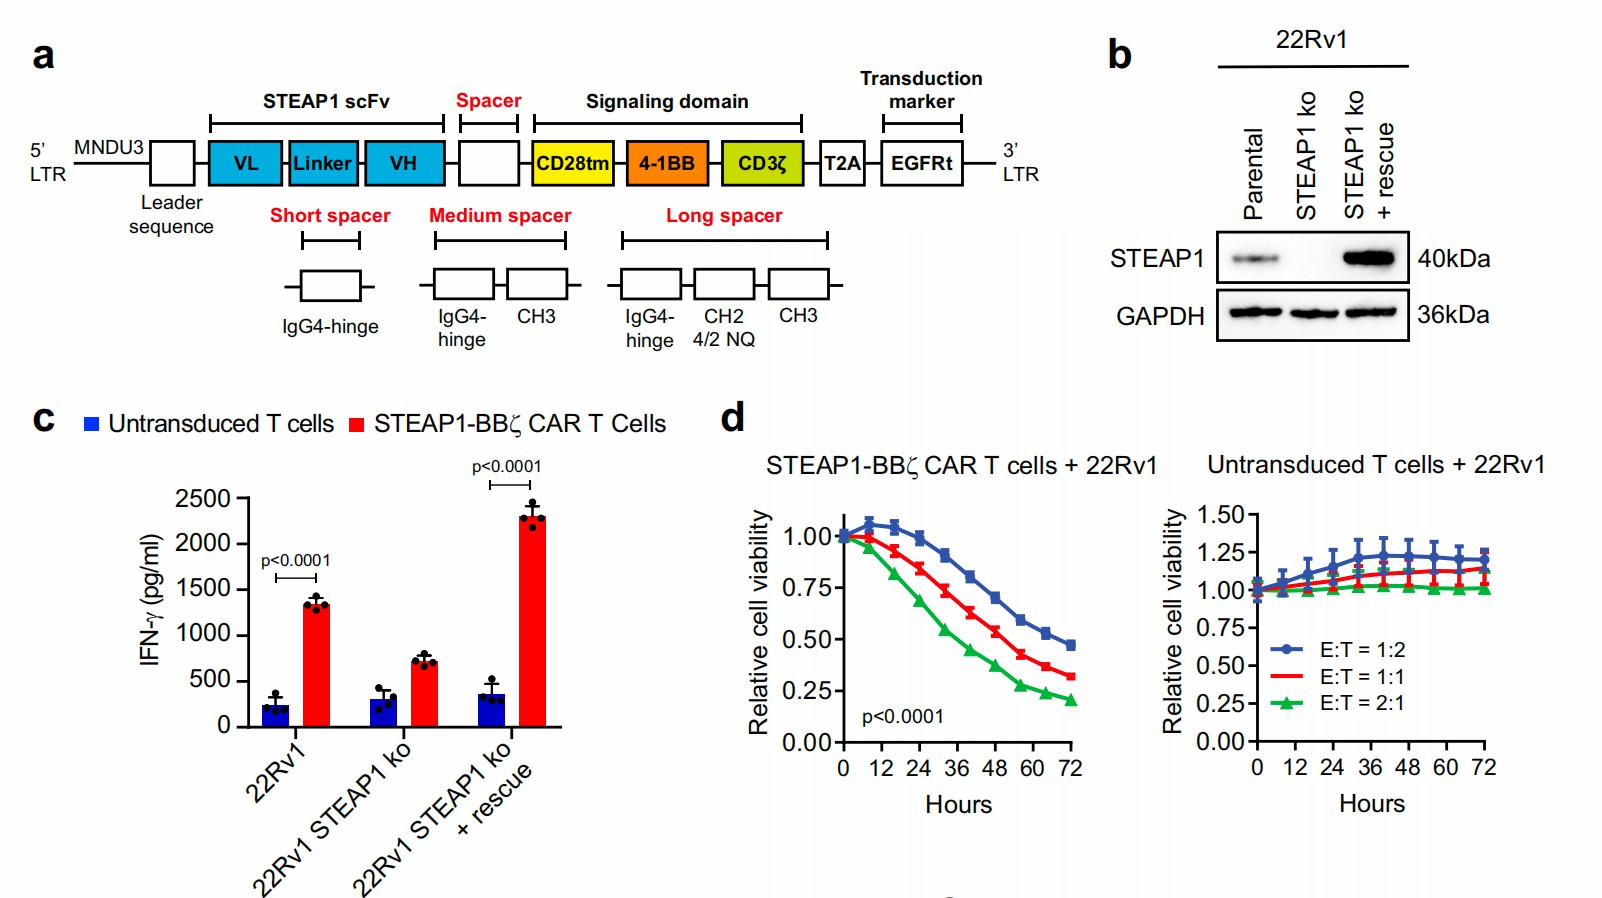 Anti-STEAP1 CAR-T generated by lentiviral transfection and showed antigen-specific cytotoxicity. (Bhatia, et al., 2023)